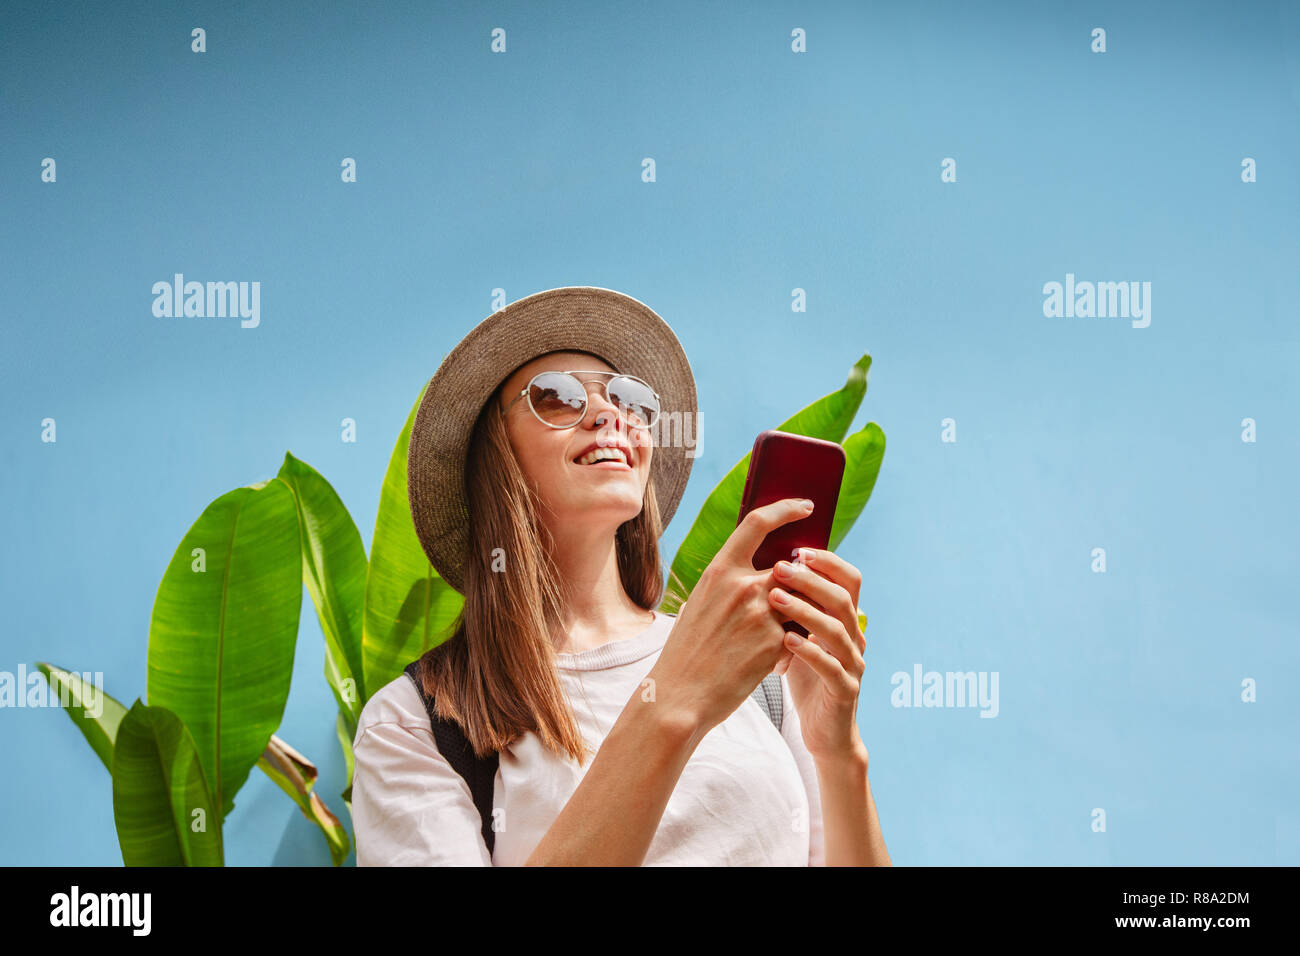 Excited young female on vacation uses smartphone Stock Photo